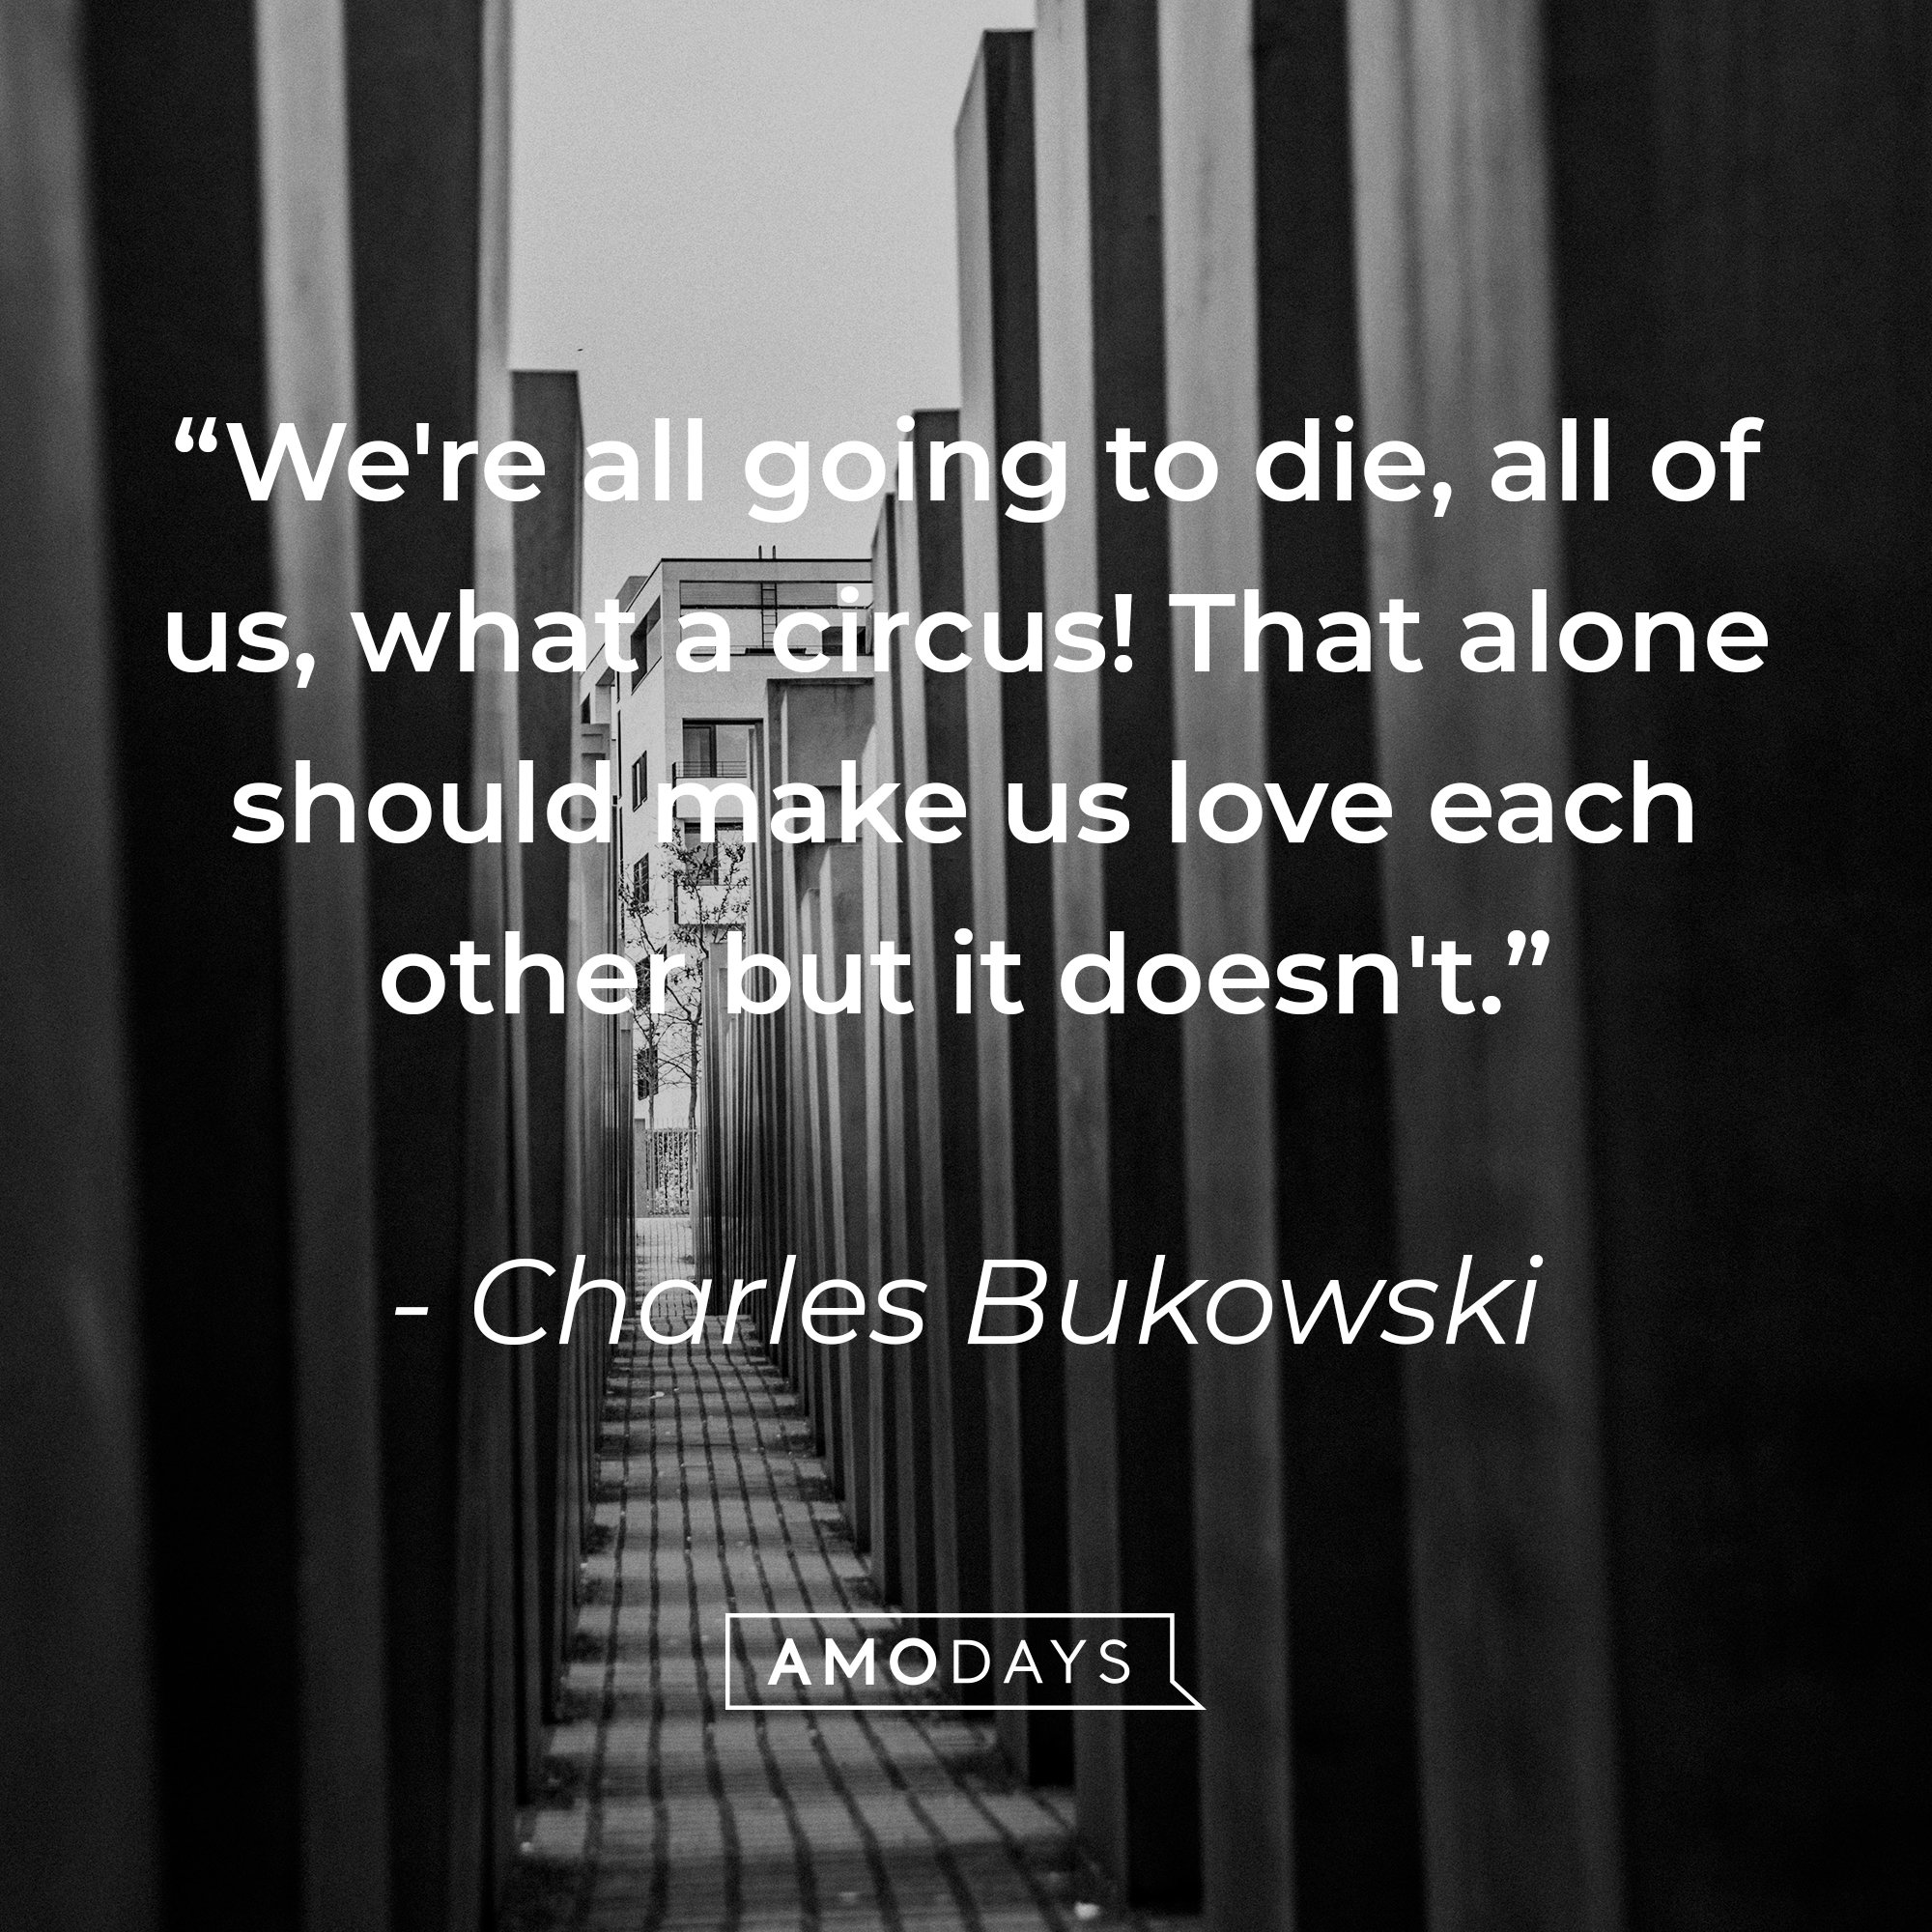   Charles Bukowski’s quote: “We're all going to die, all of us, what a circus! That alone should make us love each other but it doesn't.” | Image: Amodays